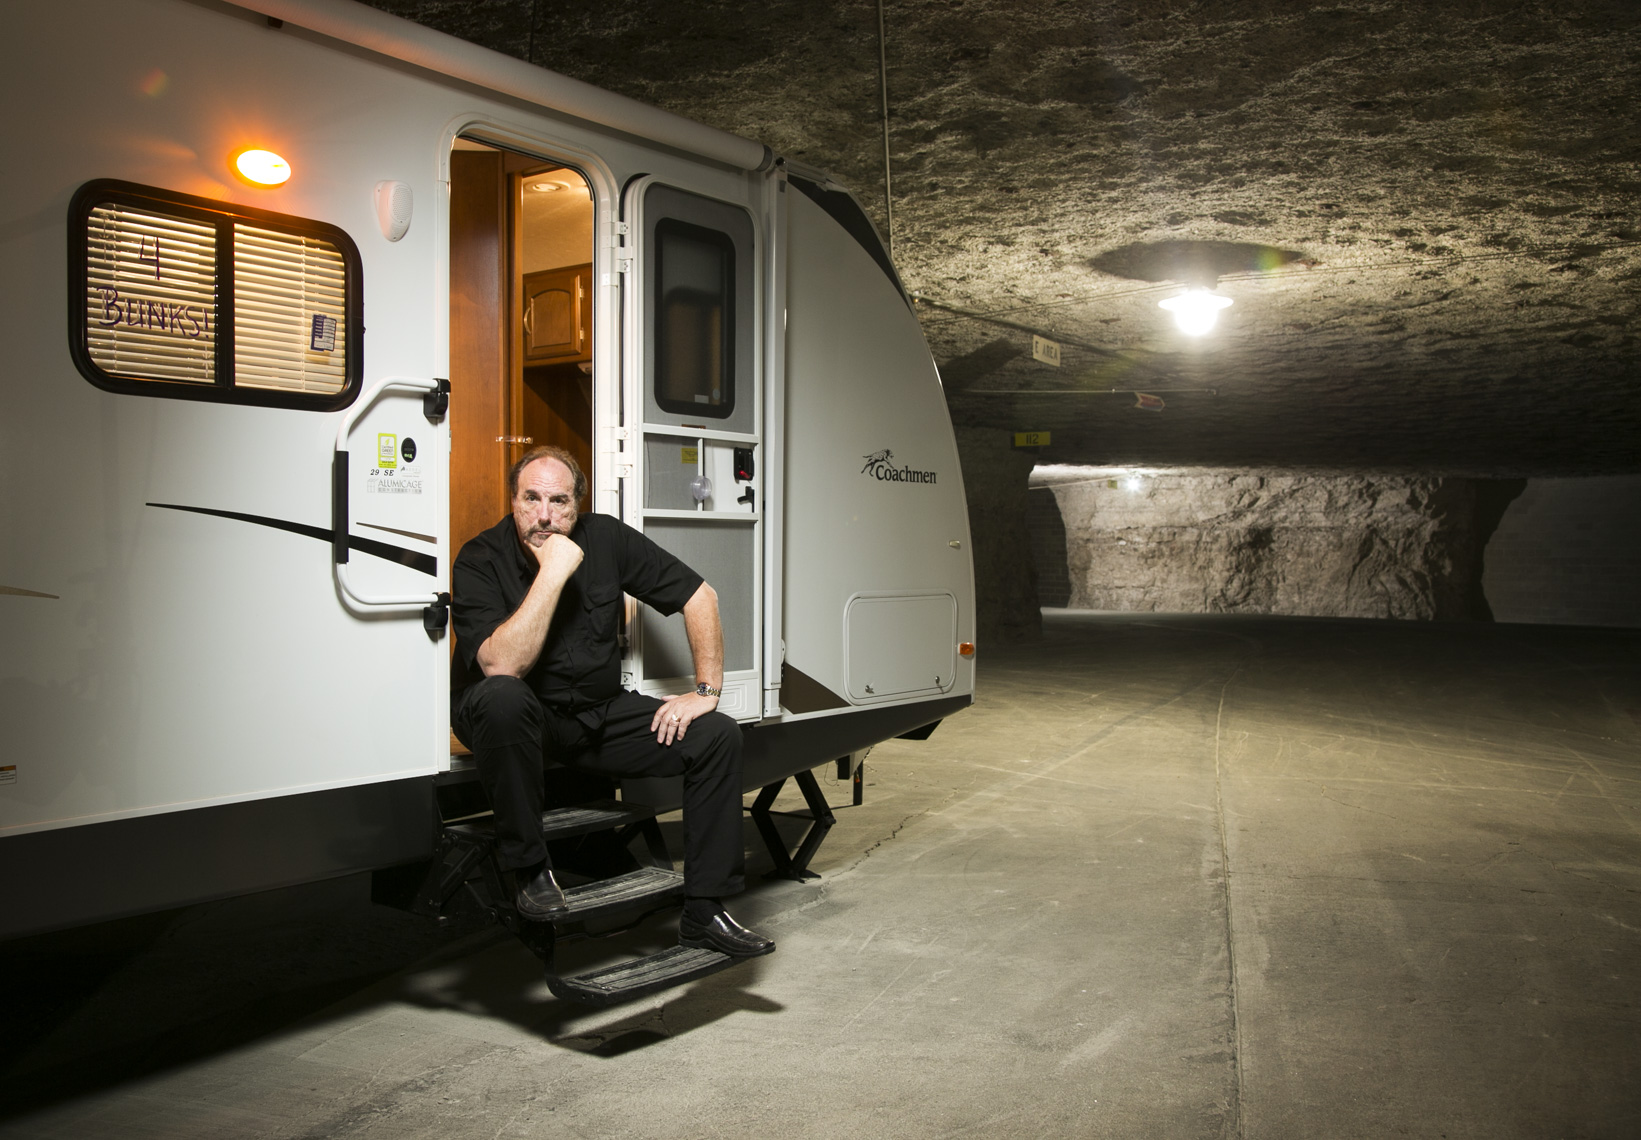 A portrait of a man sitting on an RV in a bomb shelter by Washington DC photographer Ryan Donnell